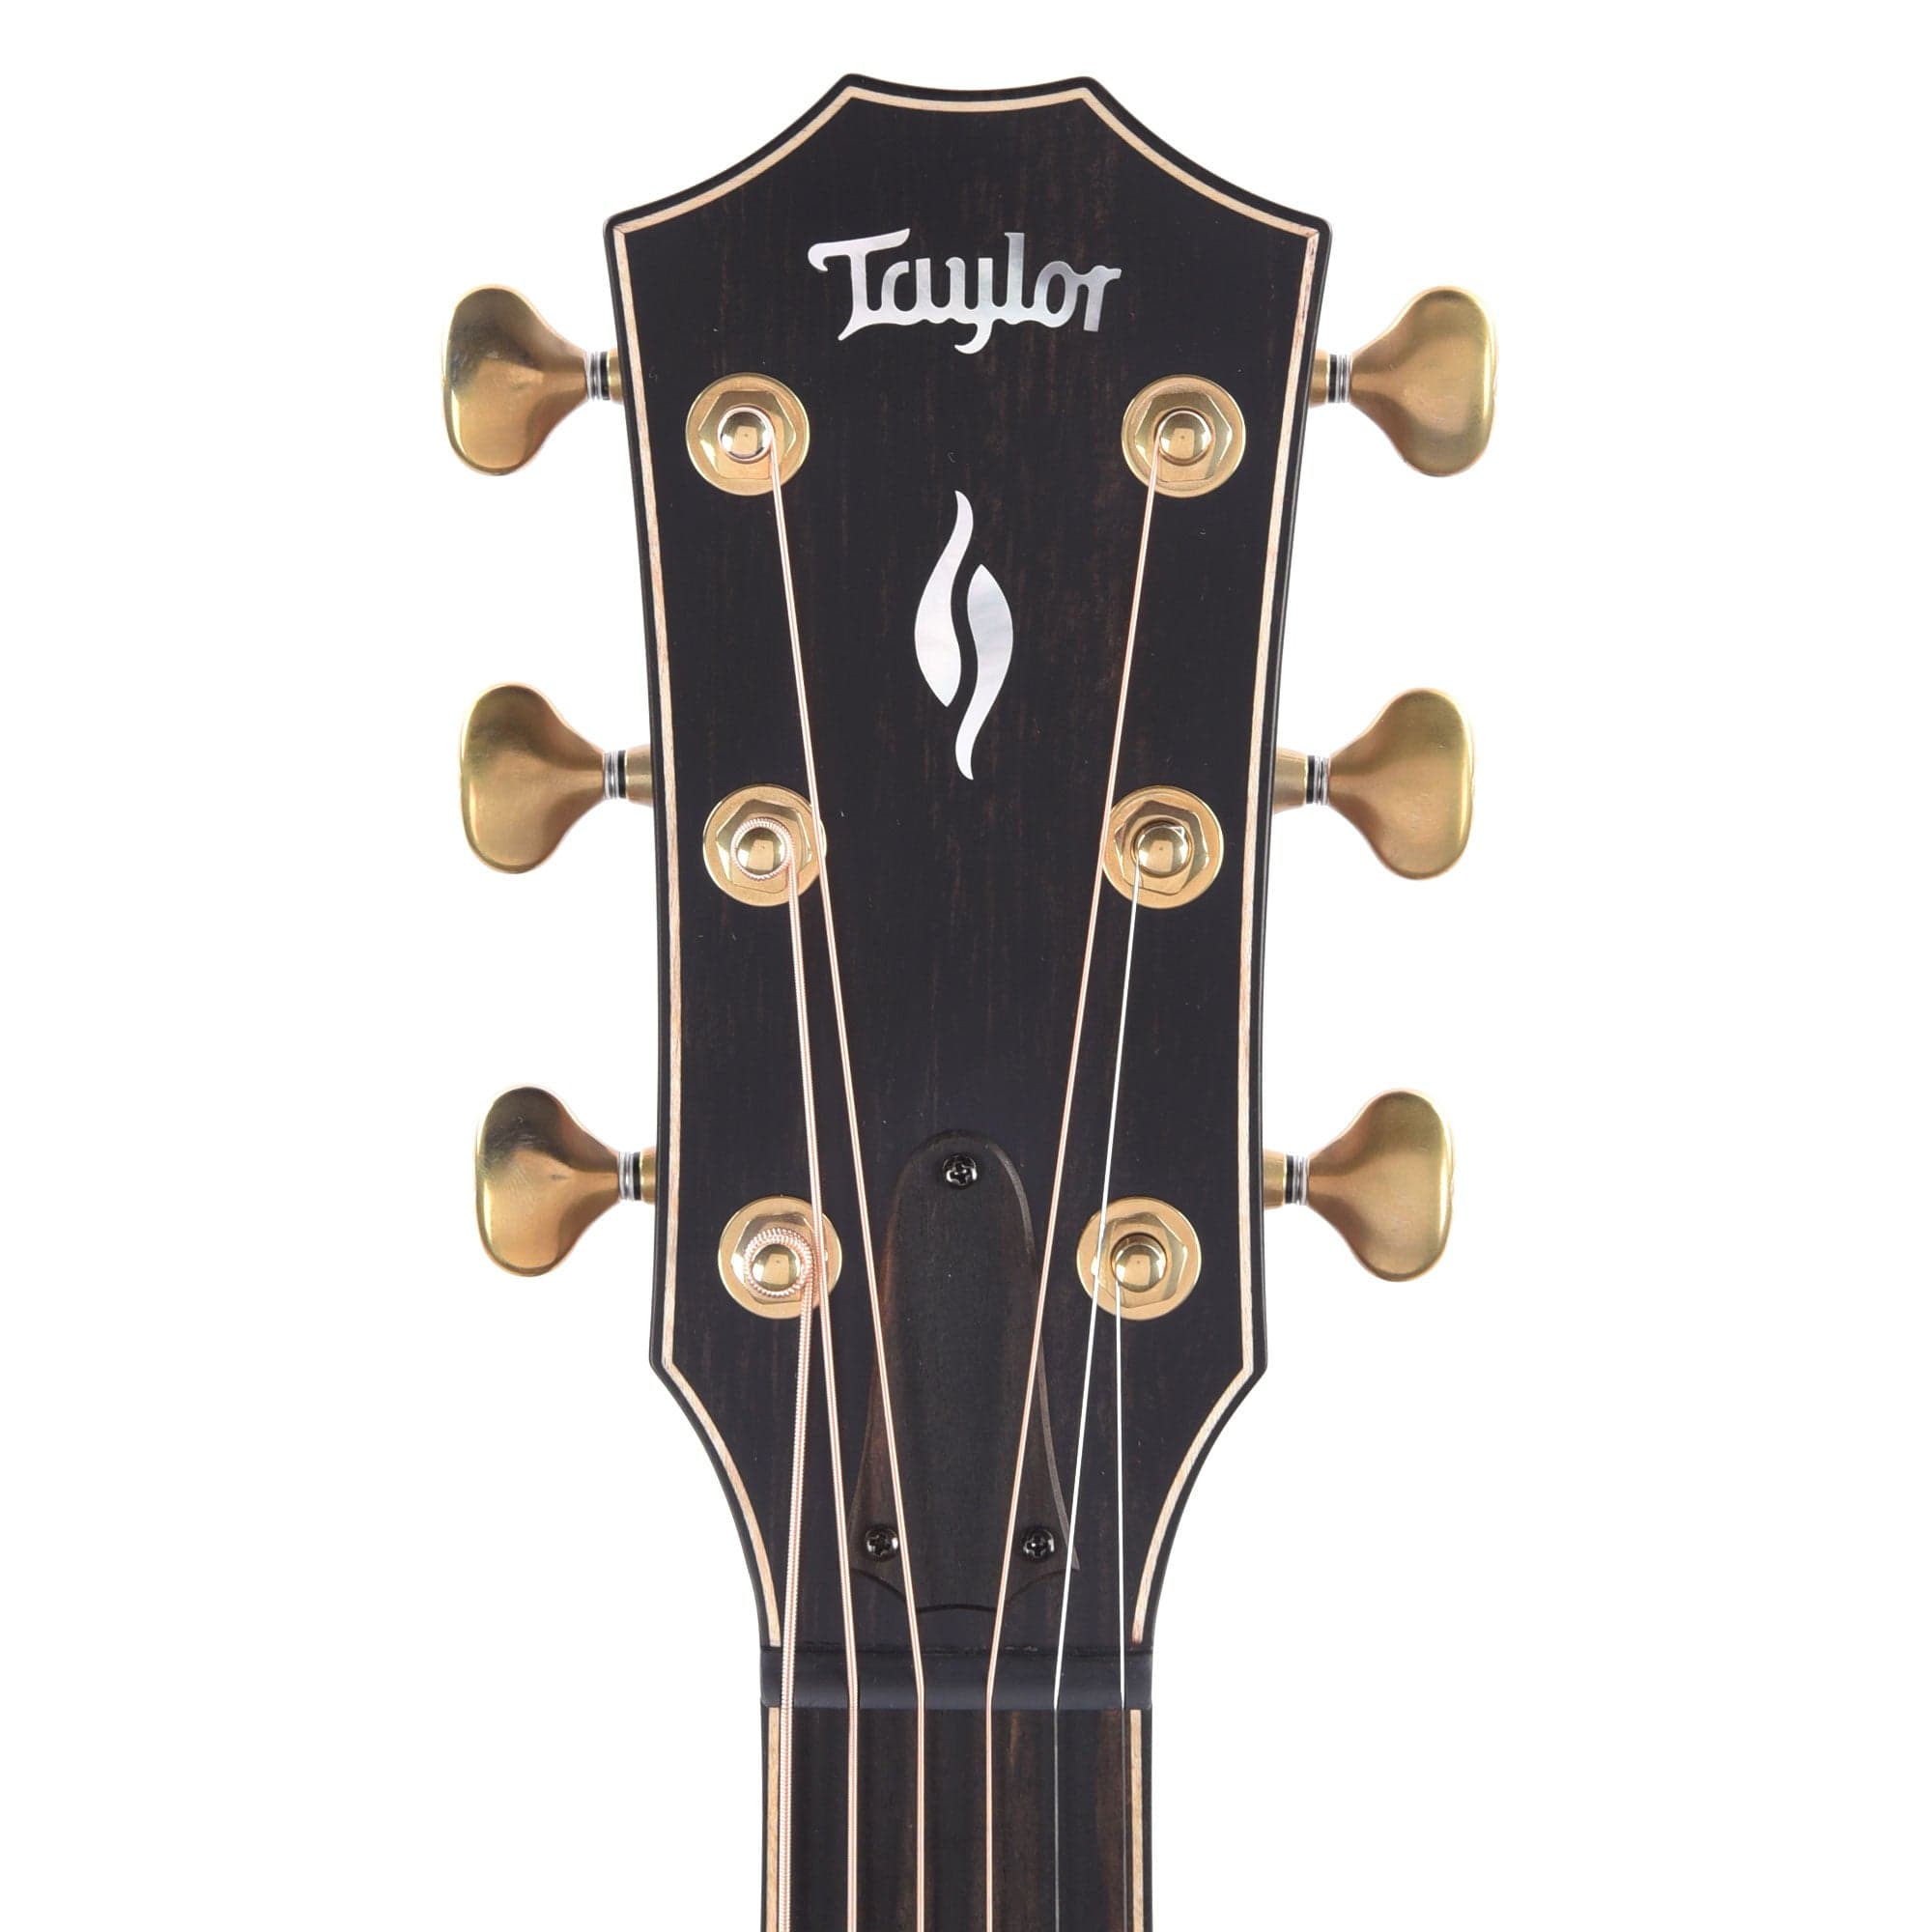 Taylor Builder's Edition 816ce Grand Symphony Lutz Spruce/Rosewood Natural ES2 Acoustic Guitars / OM and Auditorium